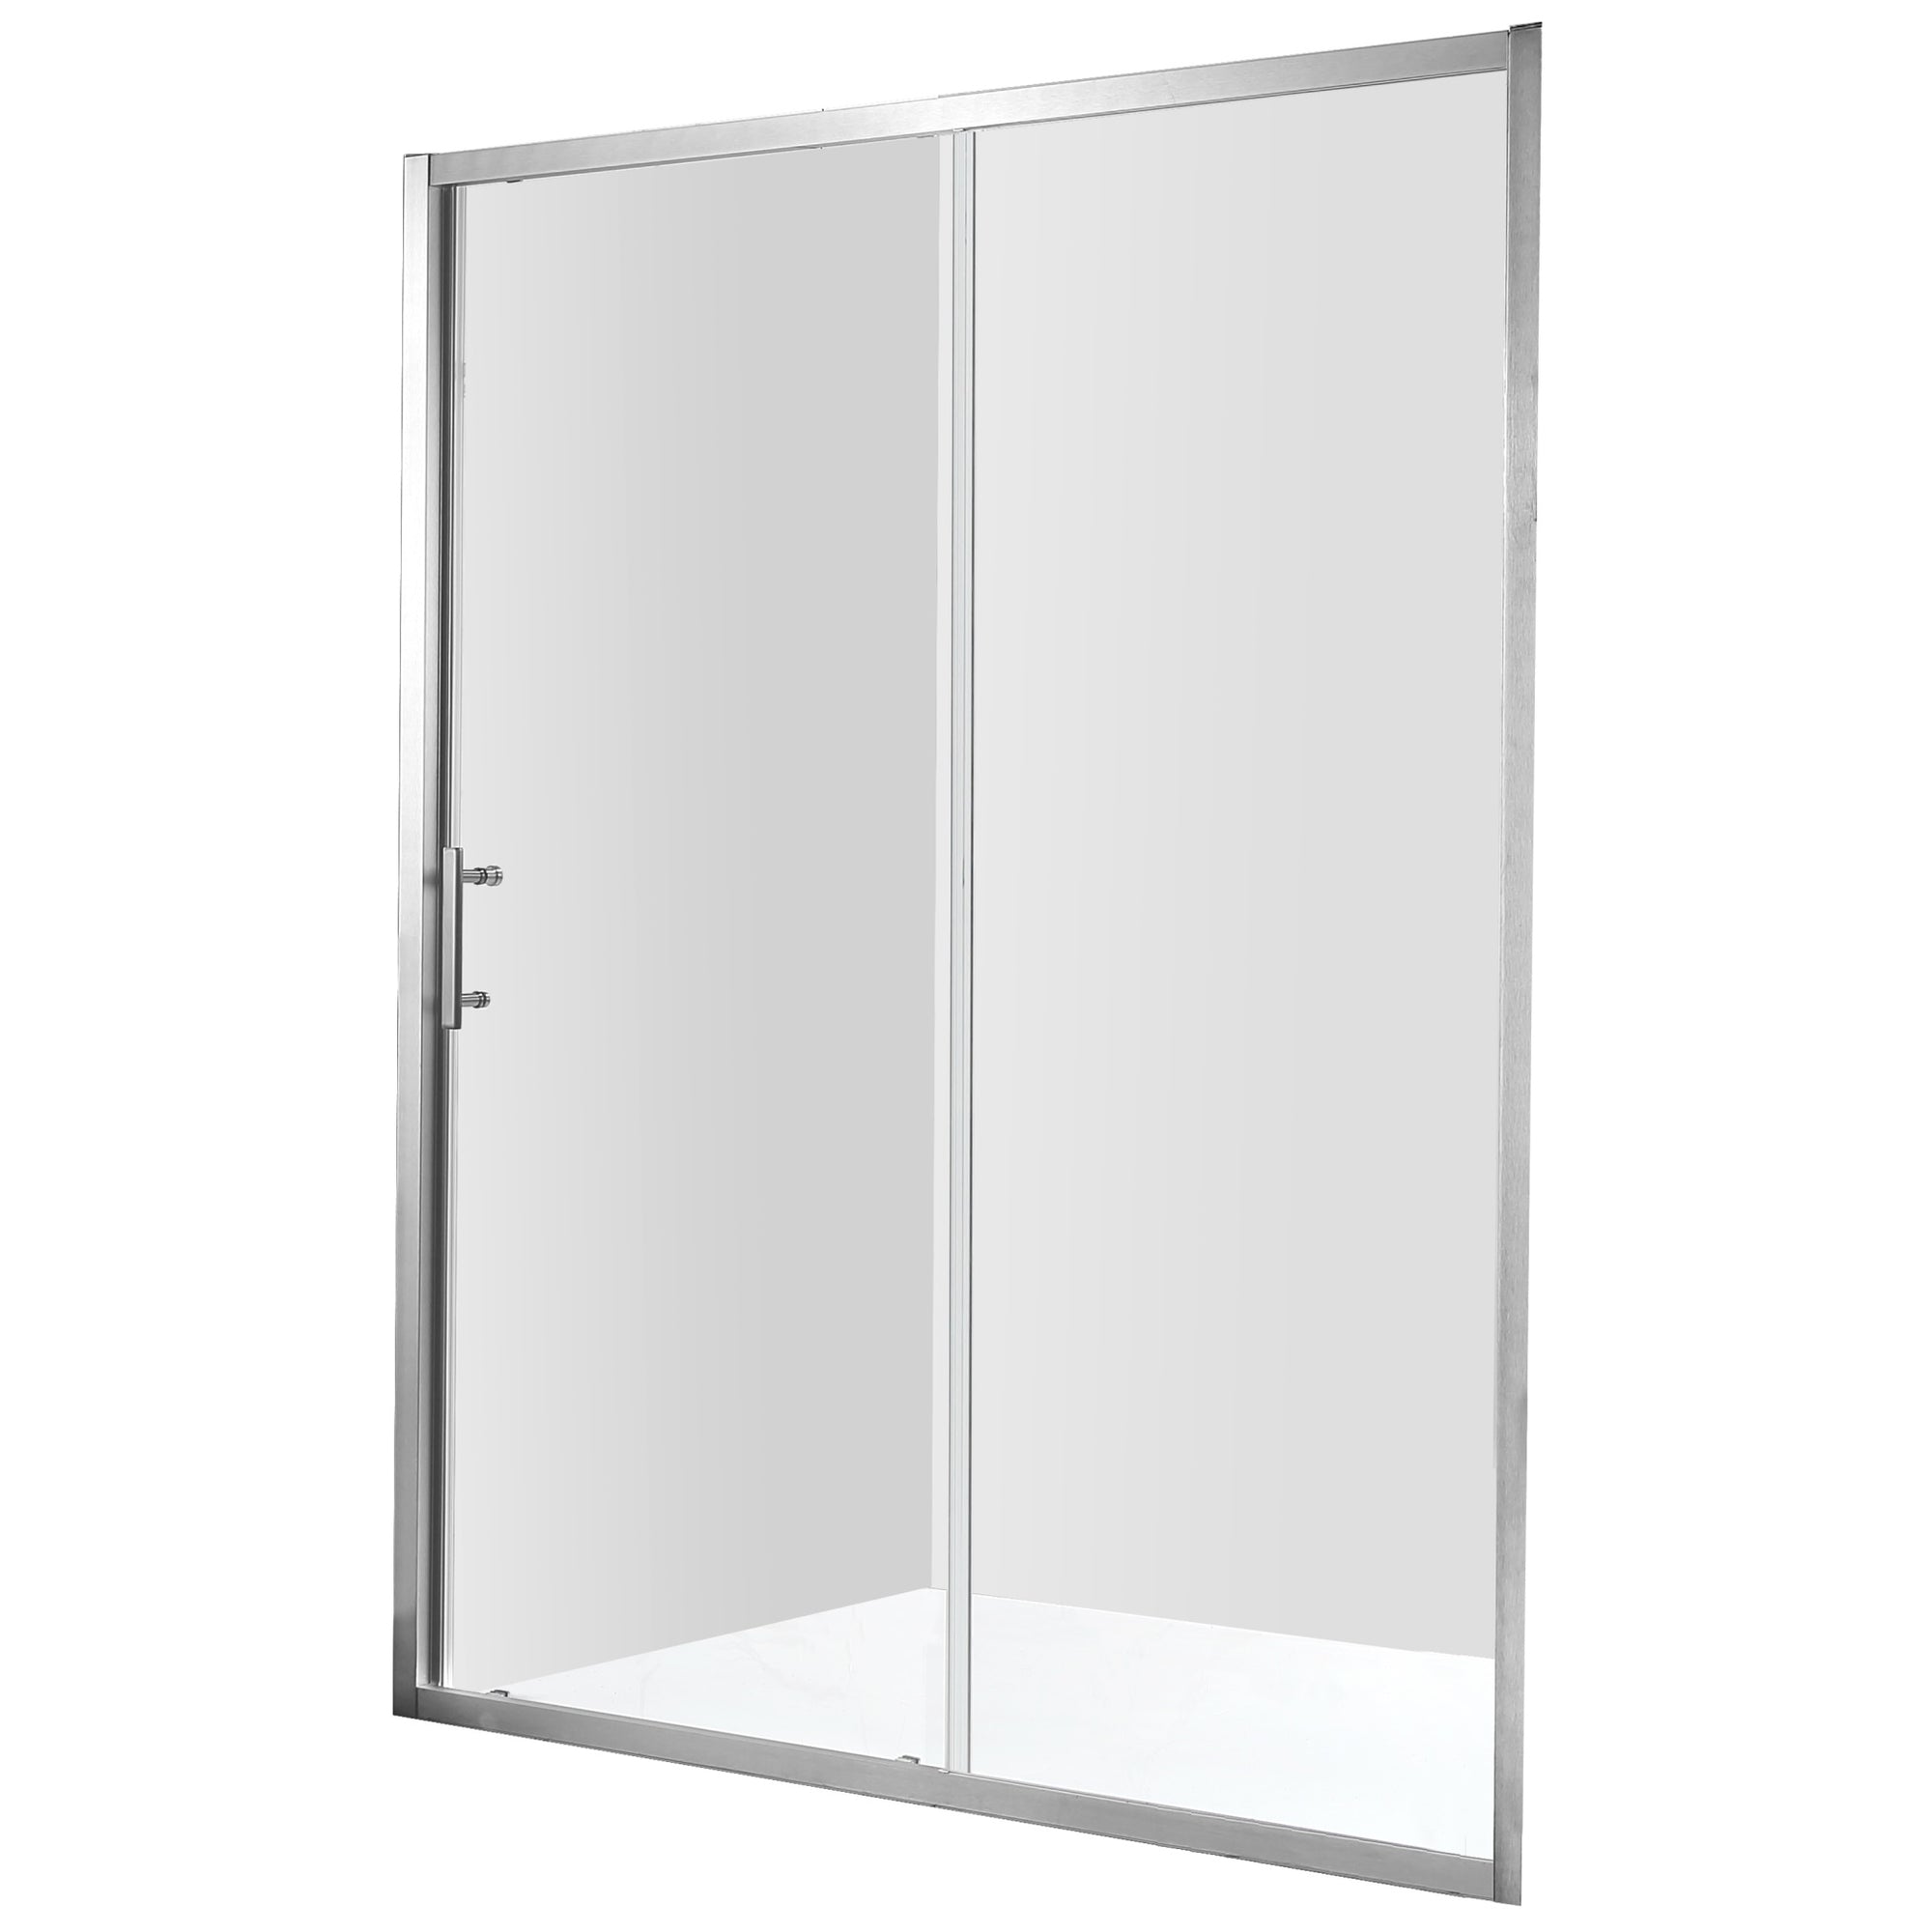 Anzzi Halberd 48 in. x 72 in. Framed Shower Door with Tsunami Guard - Tempered Glass - Marine Grade Aluminum Alloy Frame - Brushed Nickel - SD-AZ052-01 - Vital Hydrotherapy